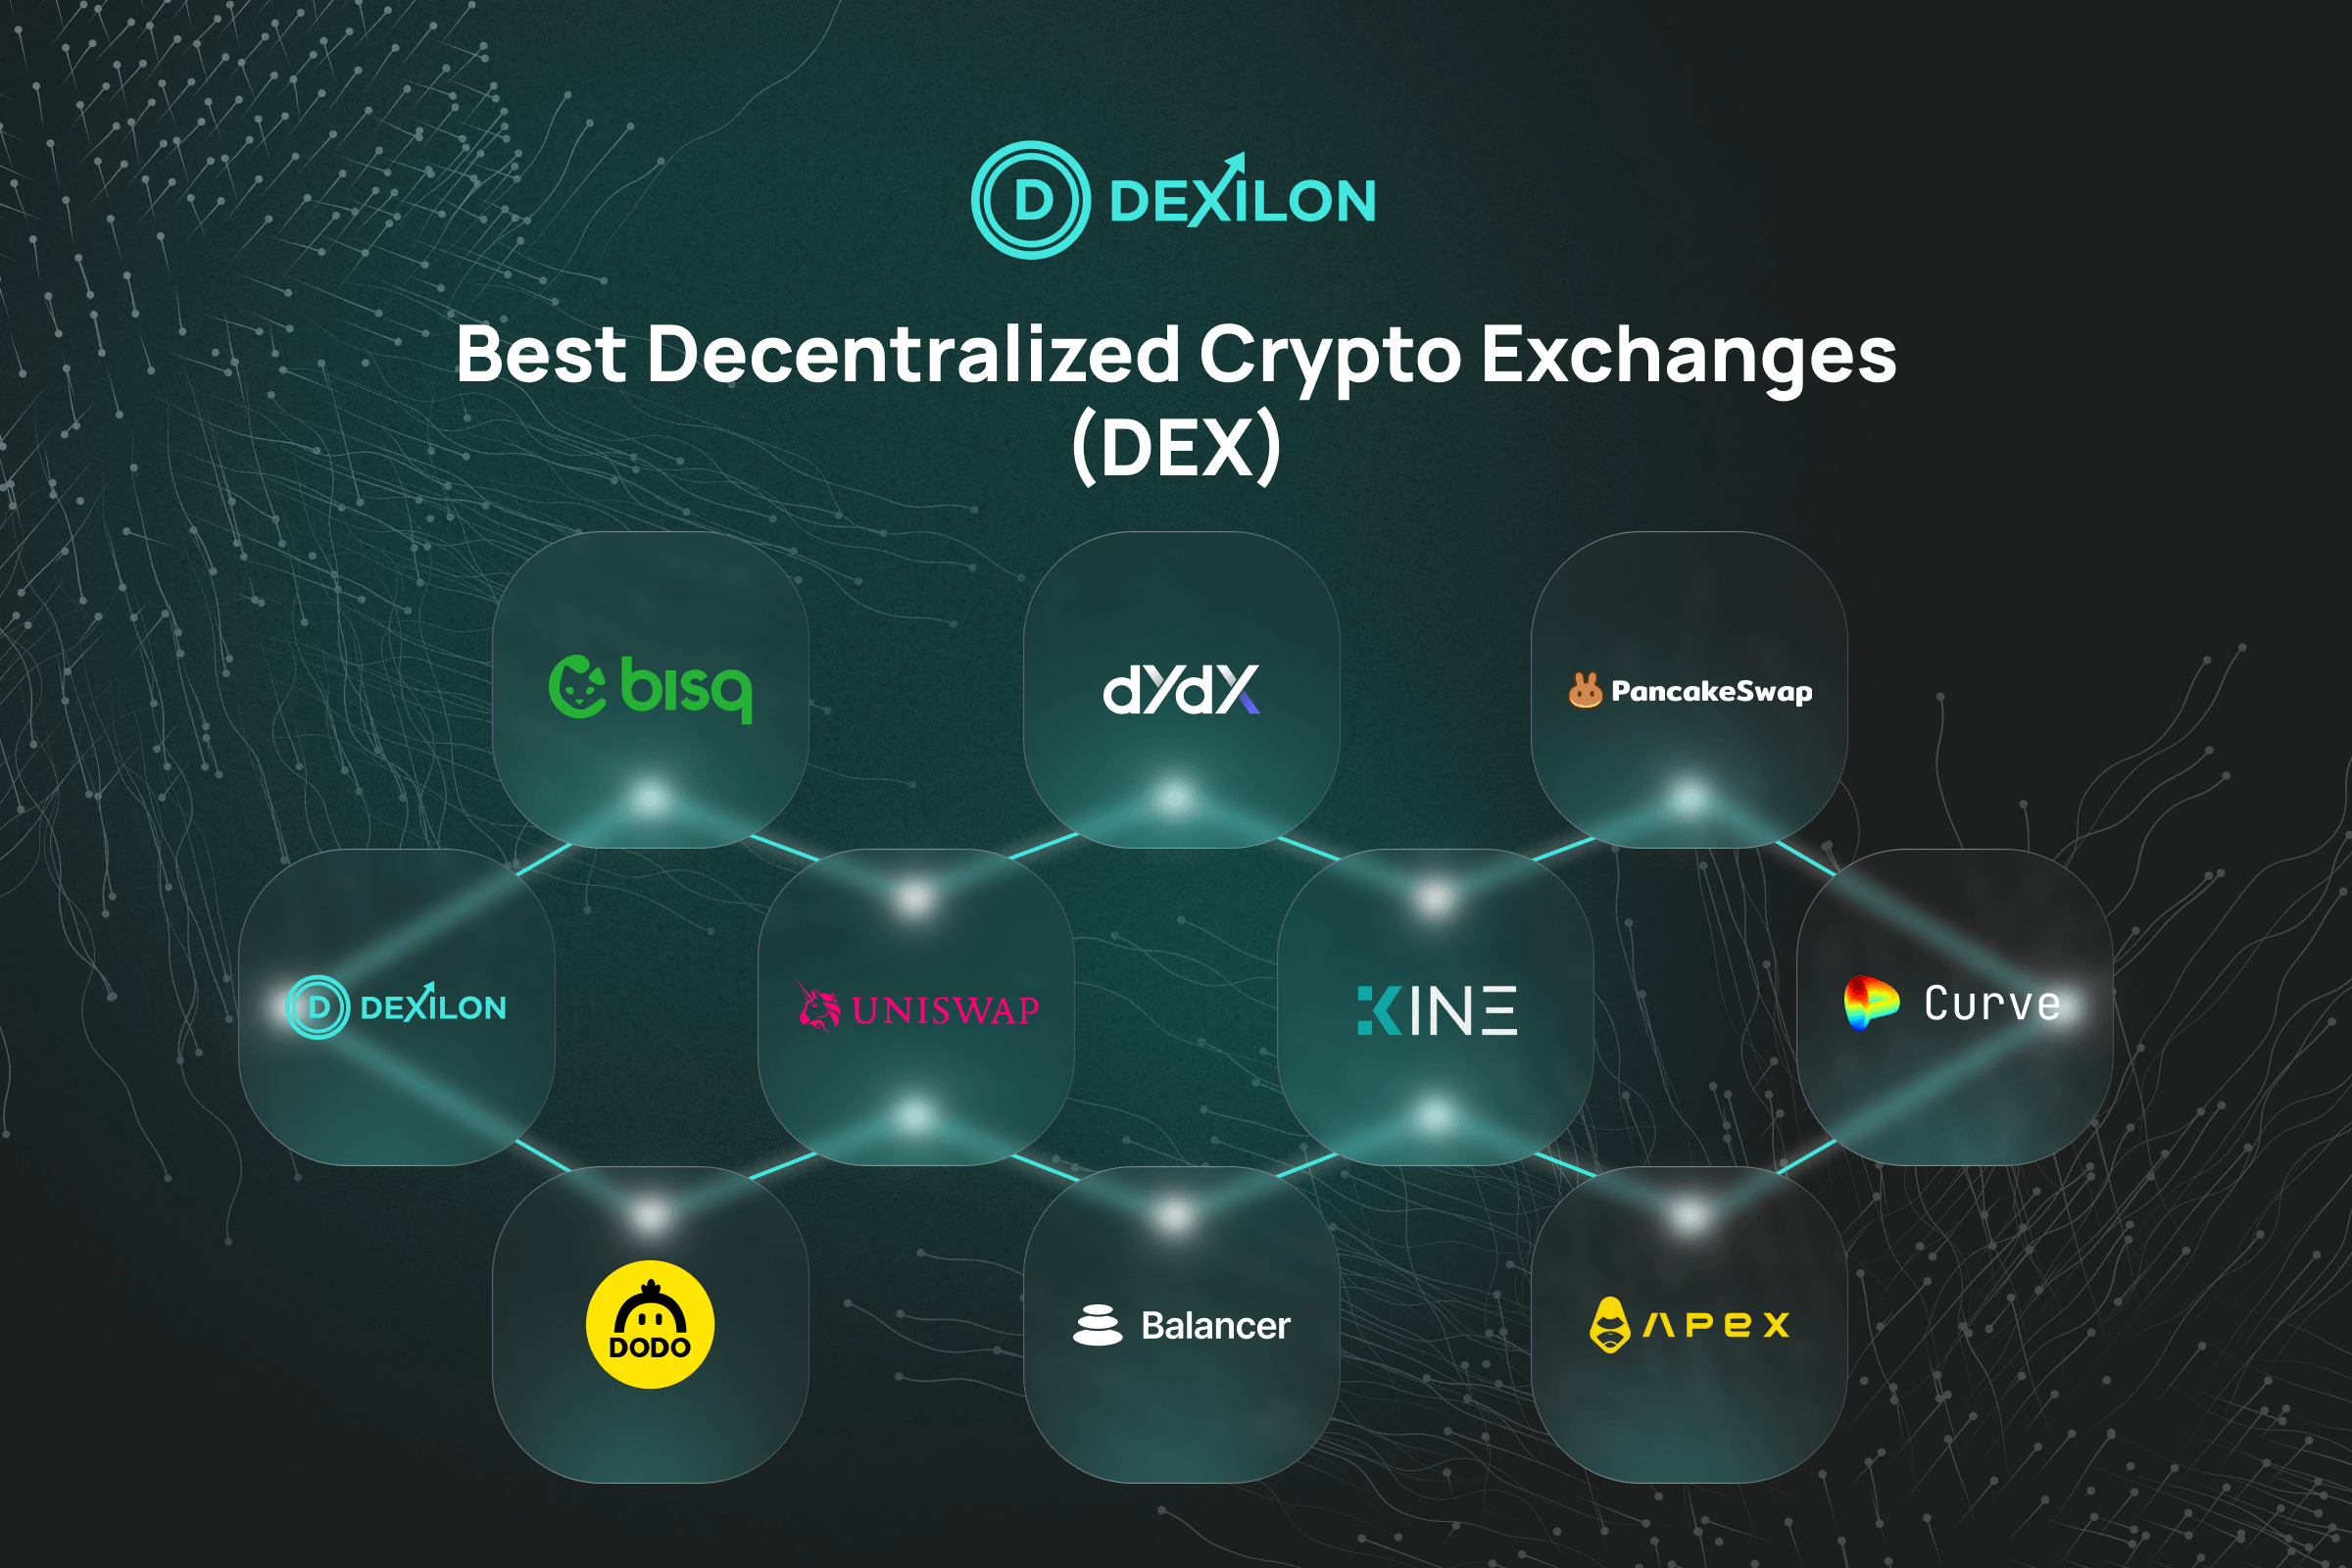 What is the Best Decentralized Crypto Exchange